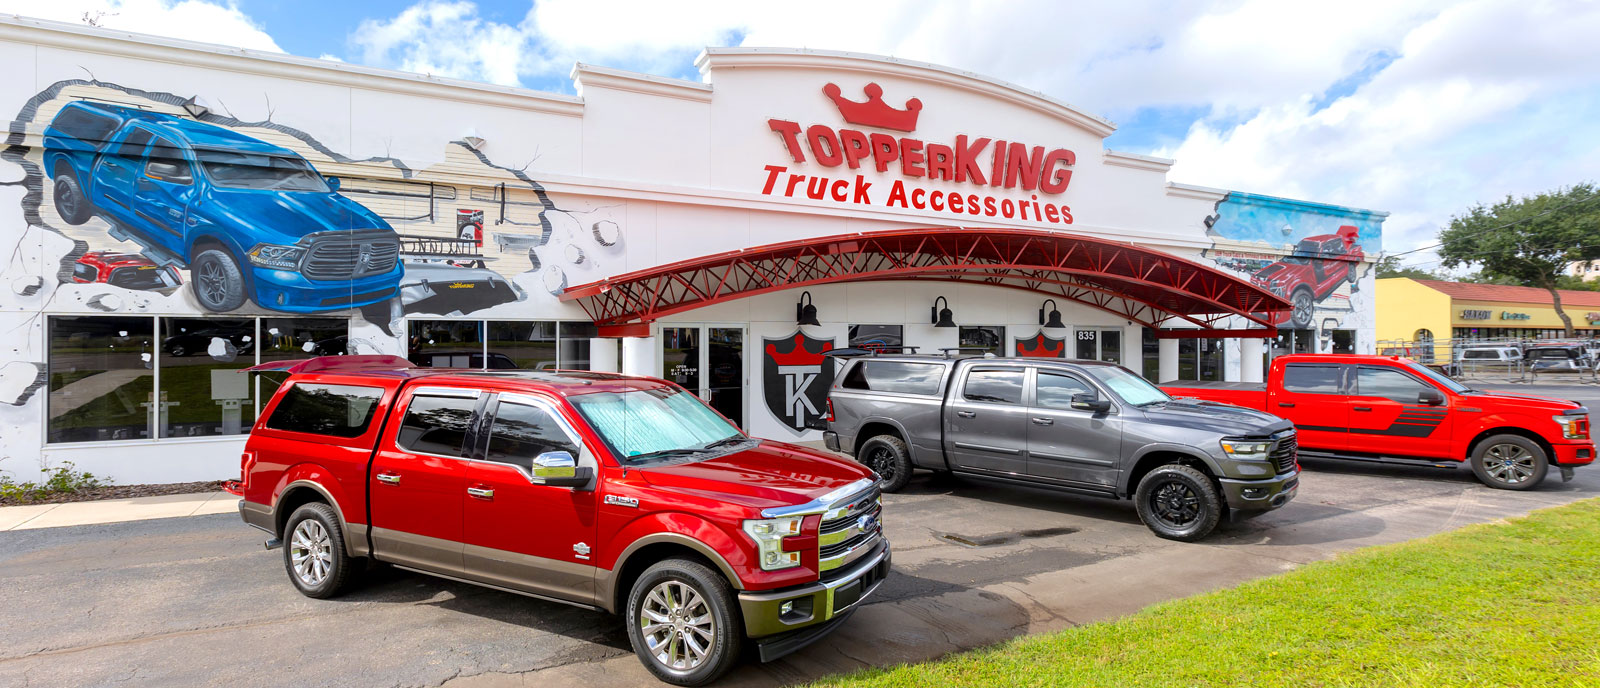 Dwelling sandhed To grader TopperKING: Tampa's source for truck toppers and accessories : TopperKING |  Providing all of Tampa Bay with quality truck accessories